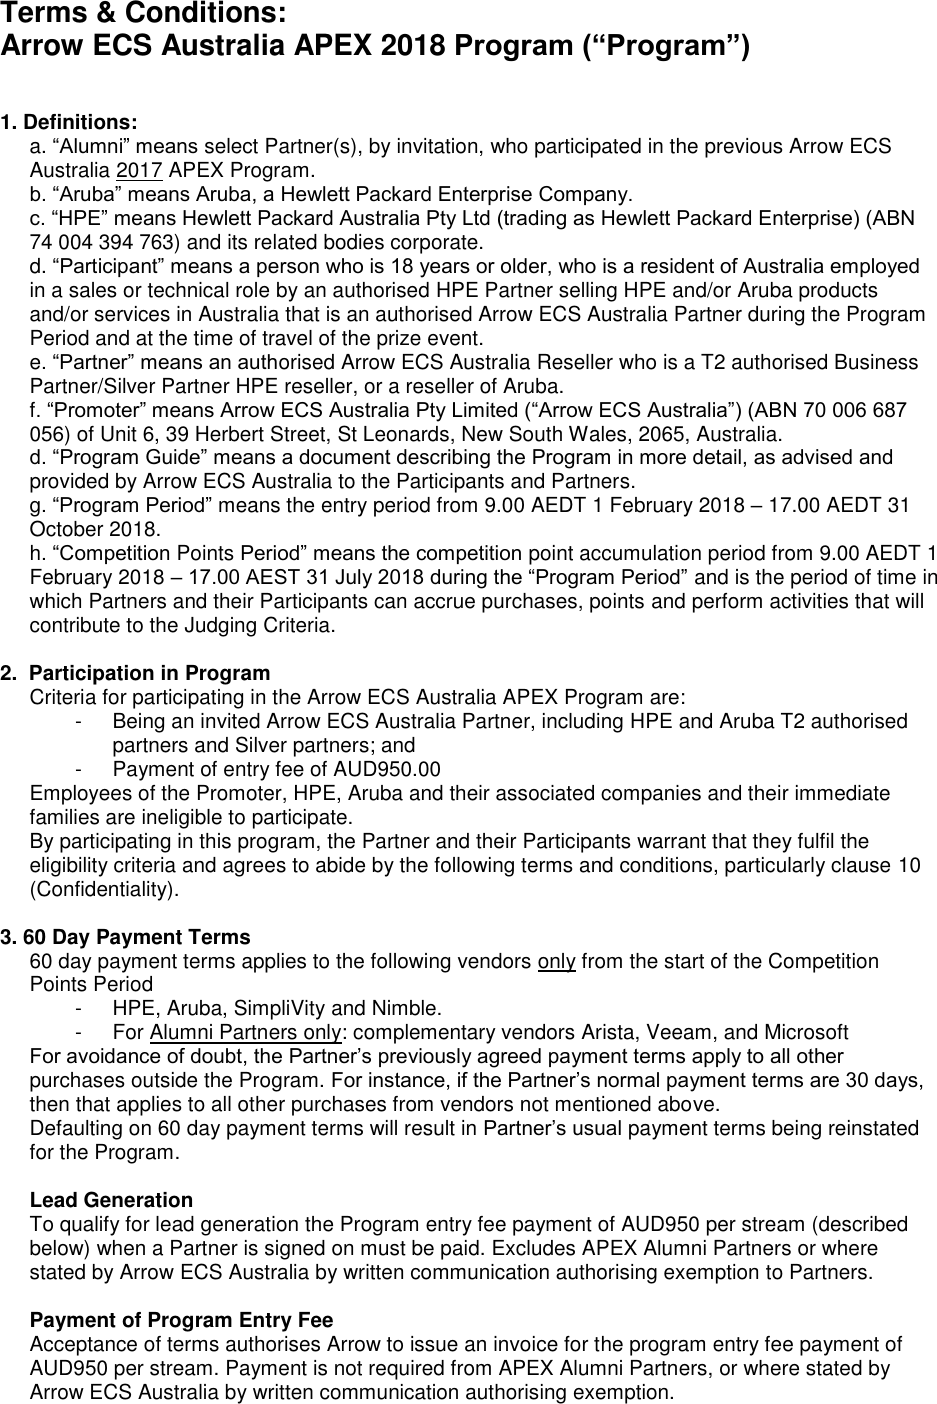 Page 1 of 4 - APEX-Program-Terms